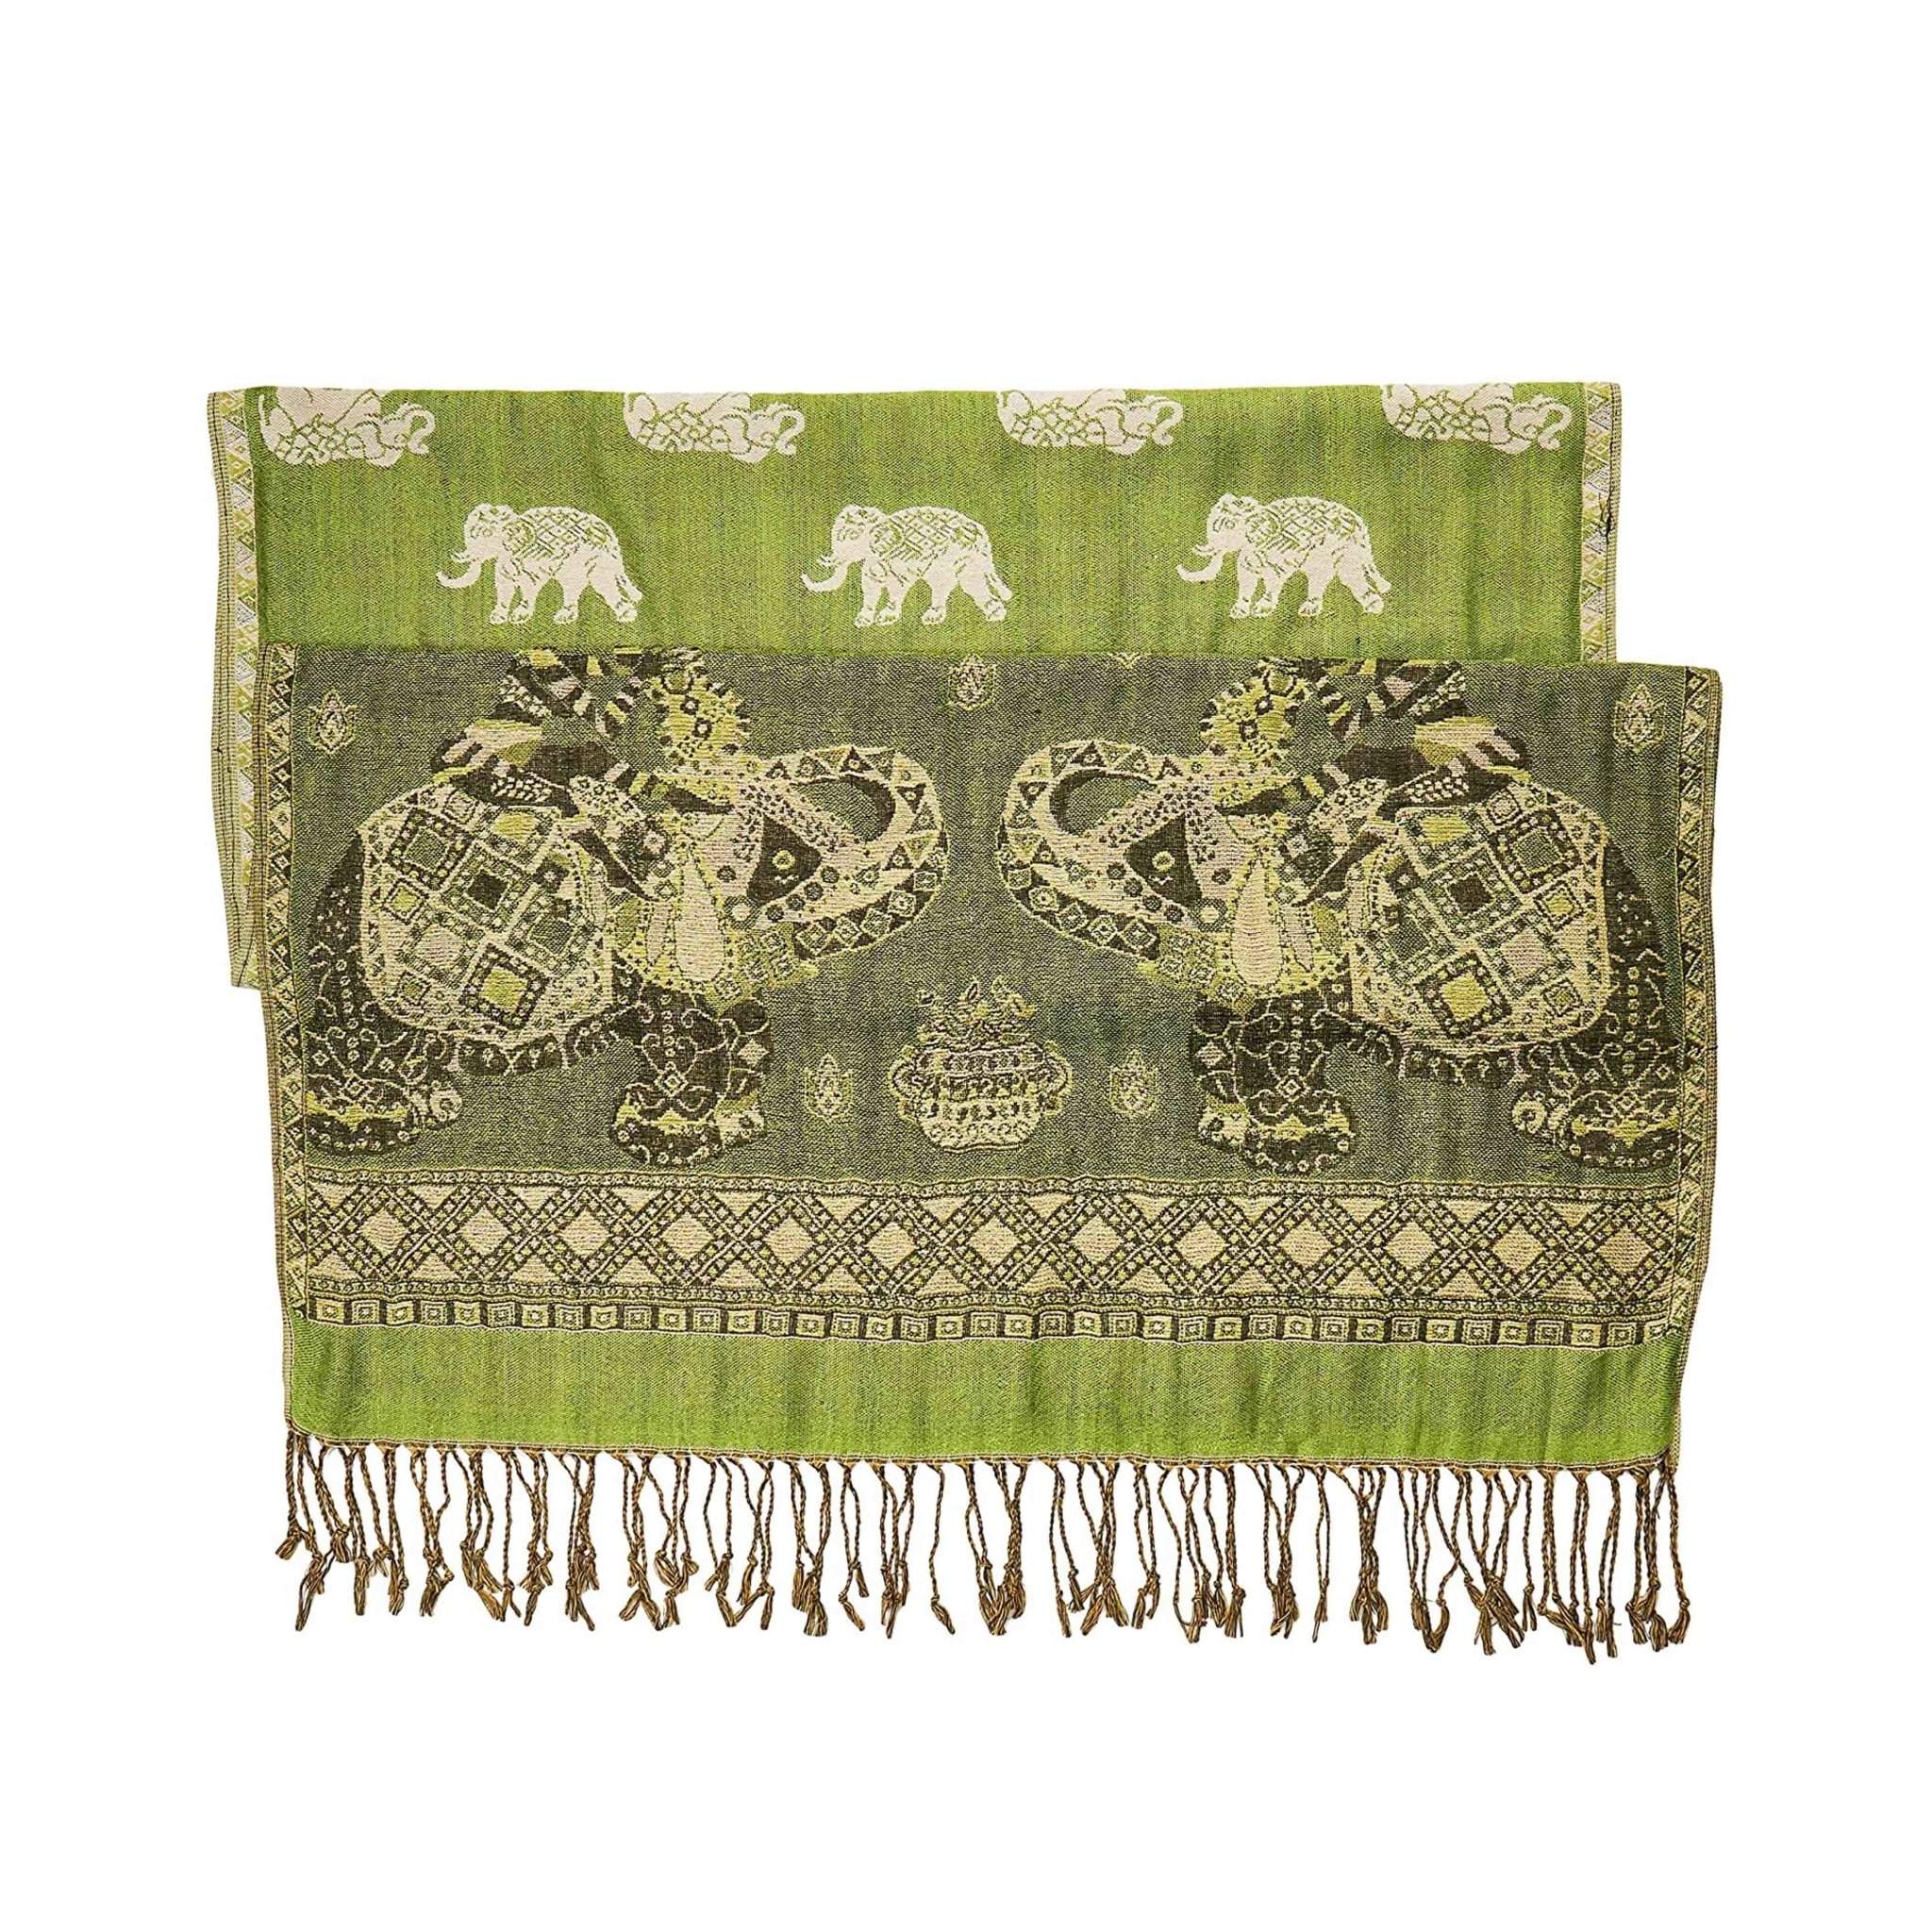 ANGKOR ELEPHANT SCARF Elepanta Scarves - Buy Today Elephant Pants Jewelry And Bohemian Clothes Handmade In Thailand Help To Save The Elephants FairTrade And Vegan